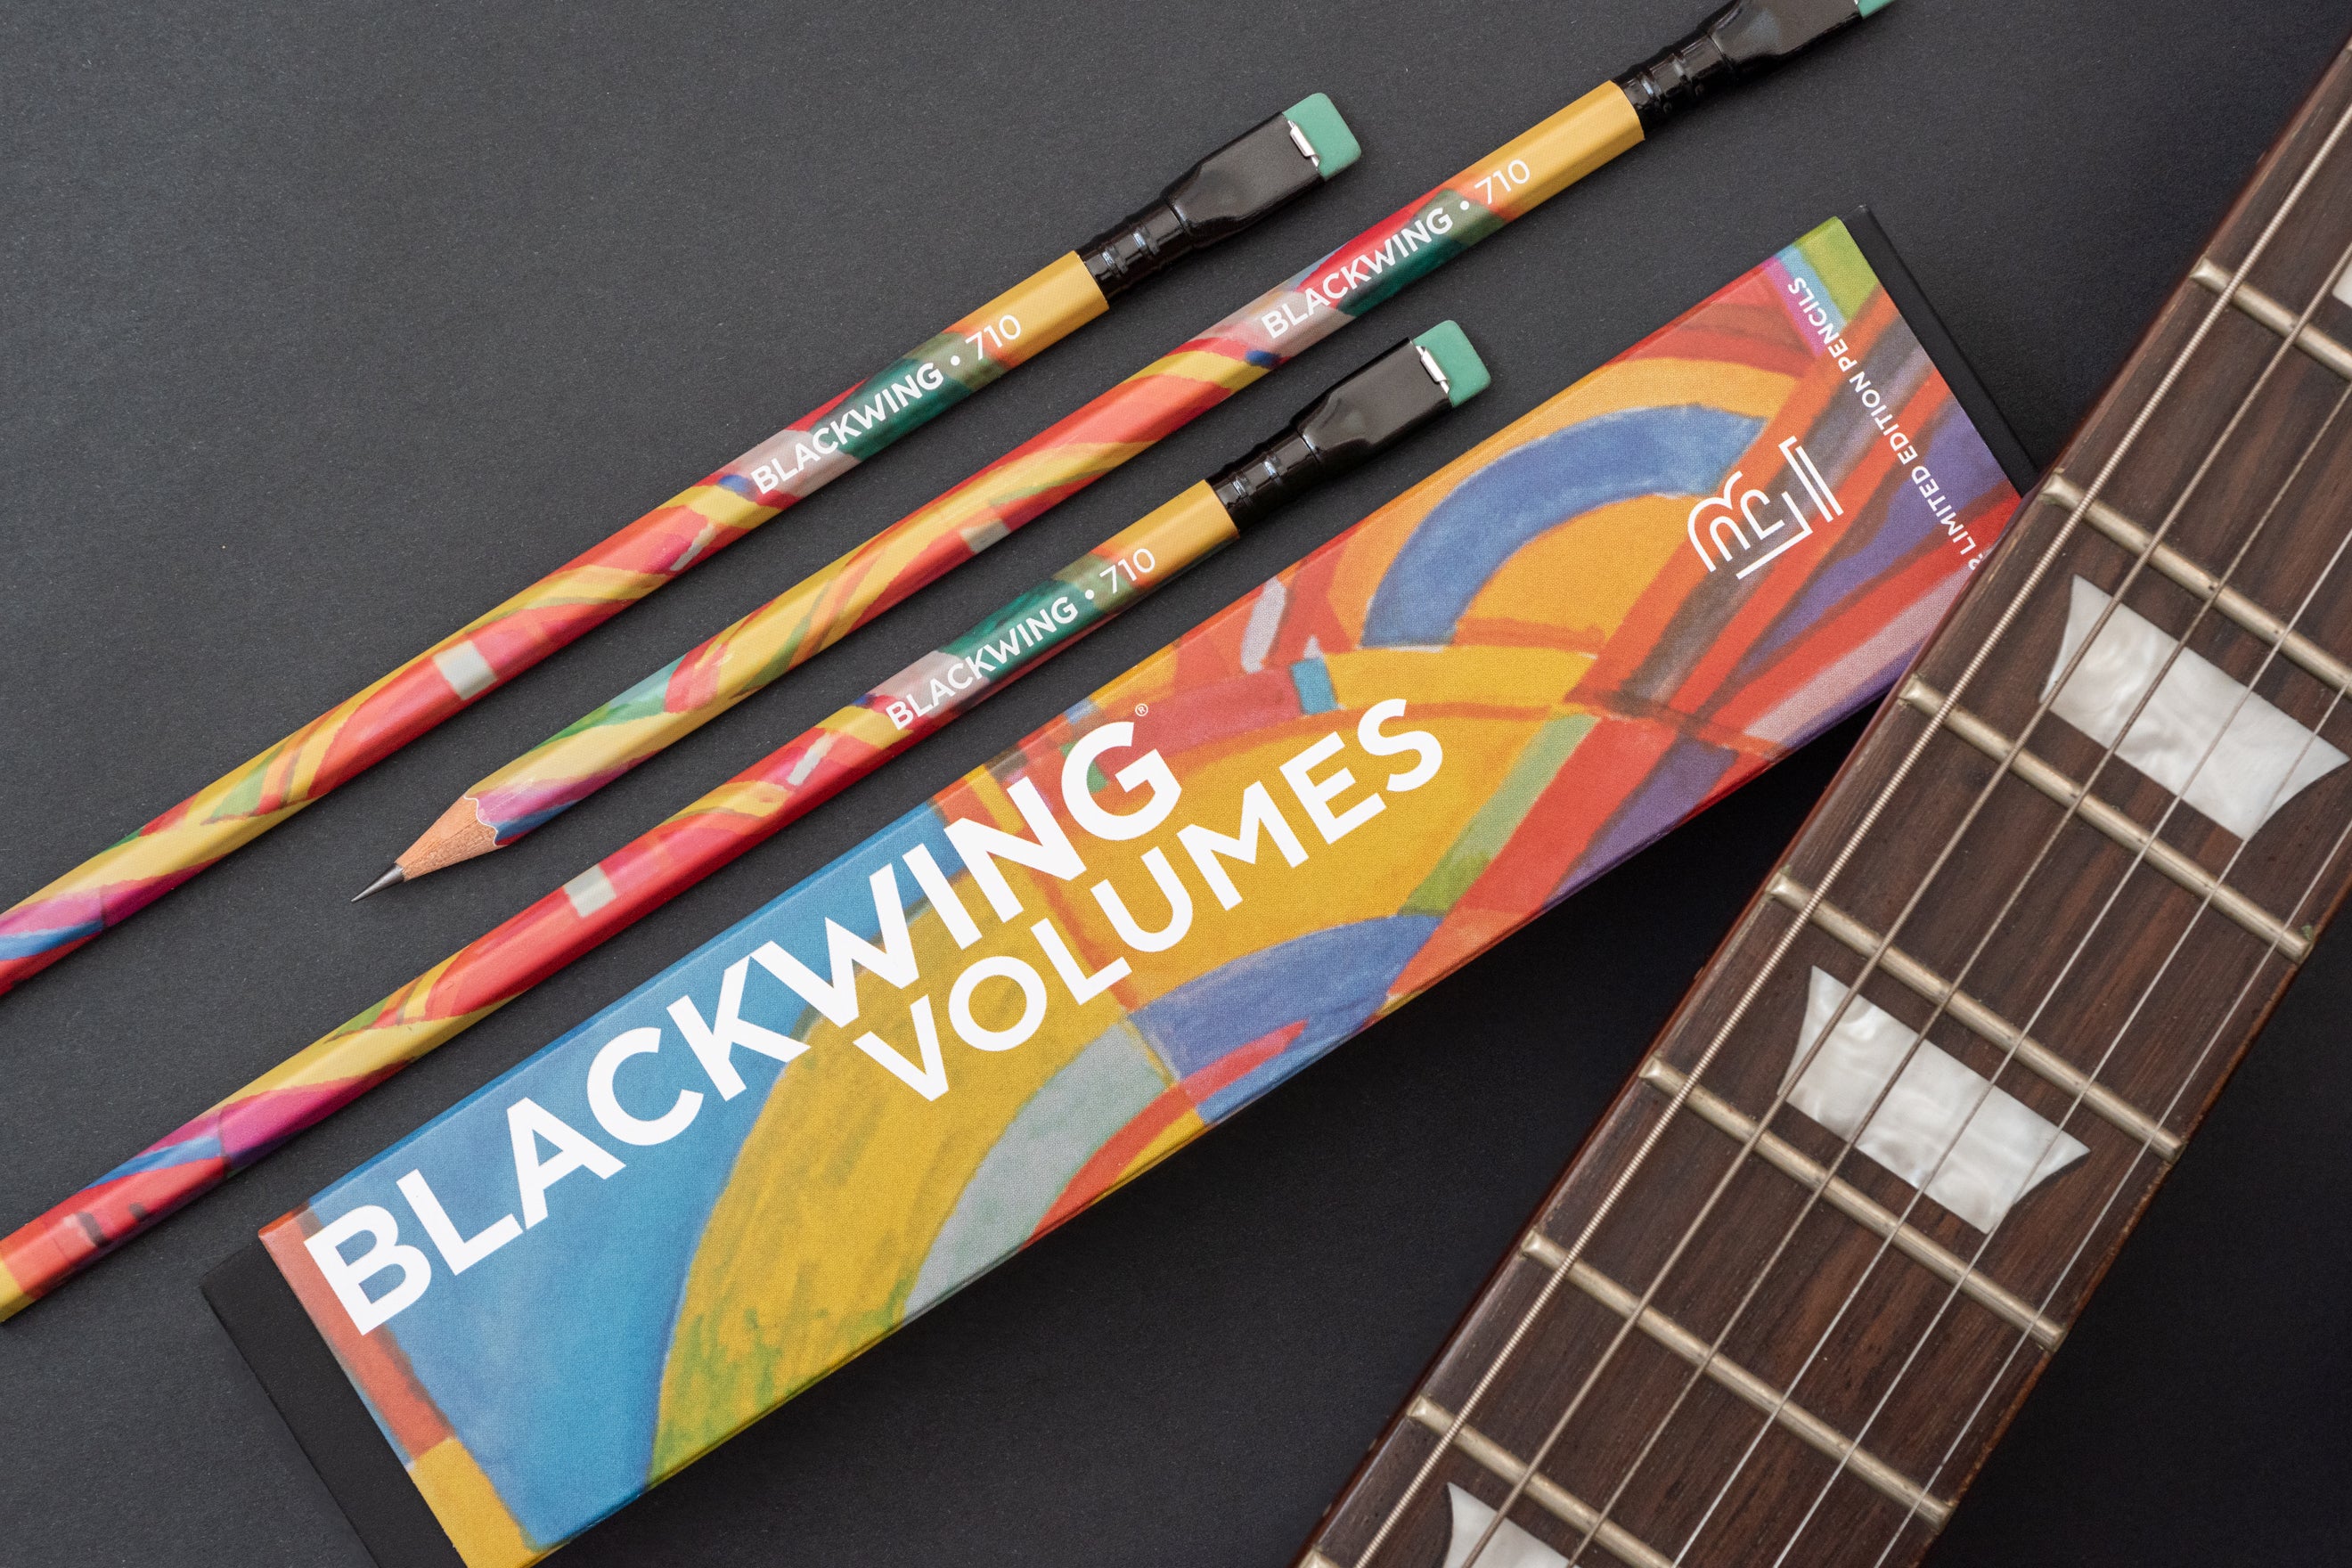 Three Blackwing Volume 710 (Set of 12) pencils and a pencil box with a colorful Grateful Dead design next to a guitar fretboard on a dark surface.